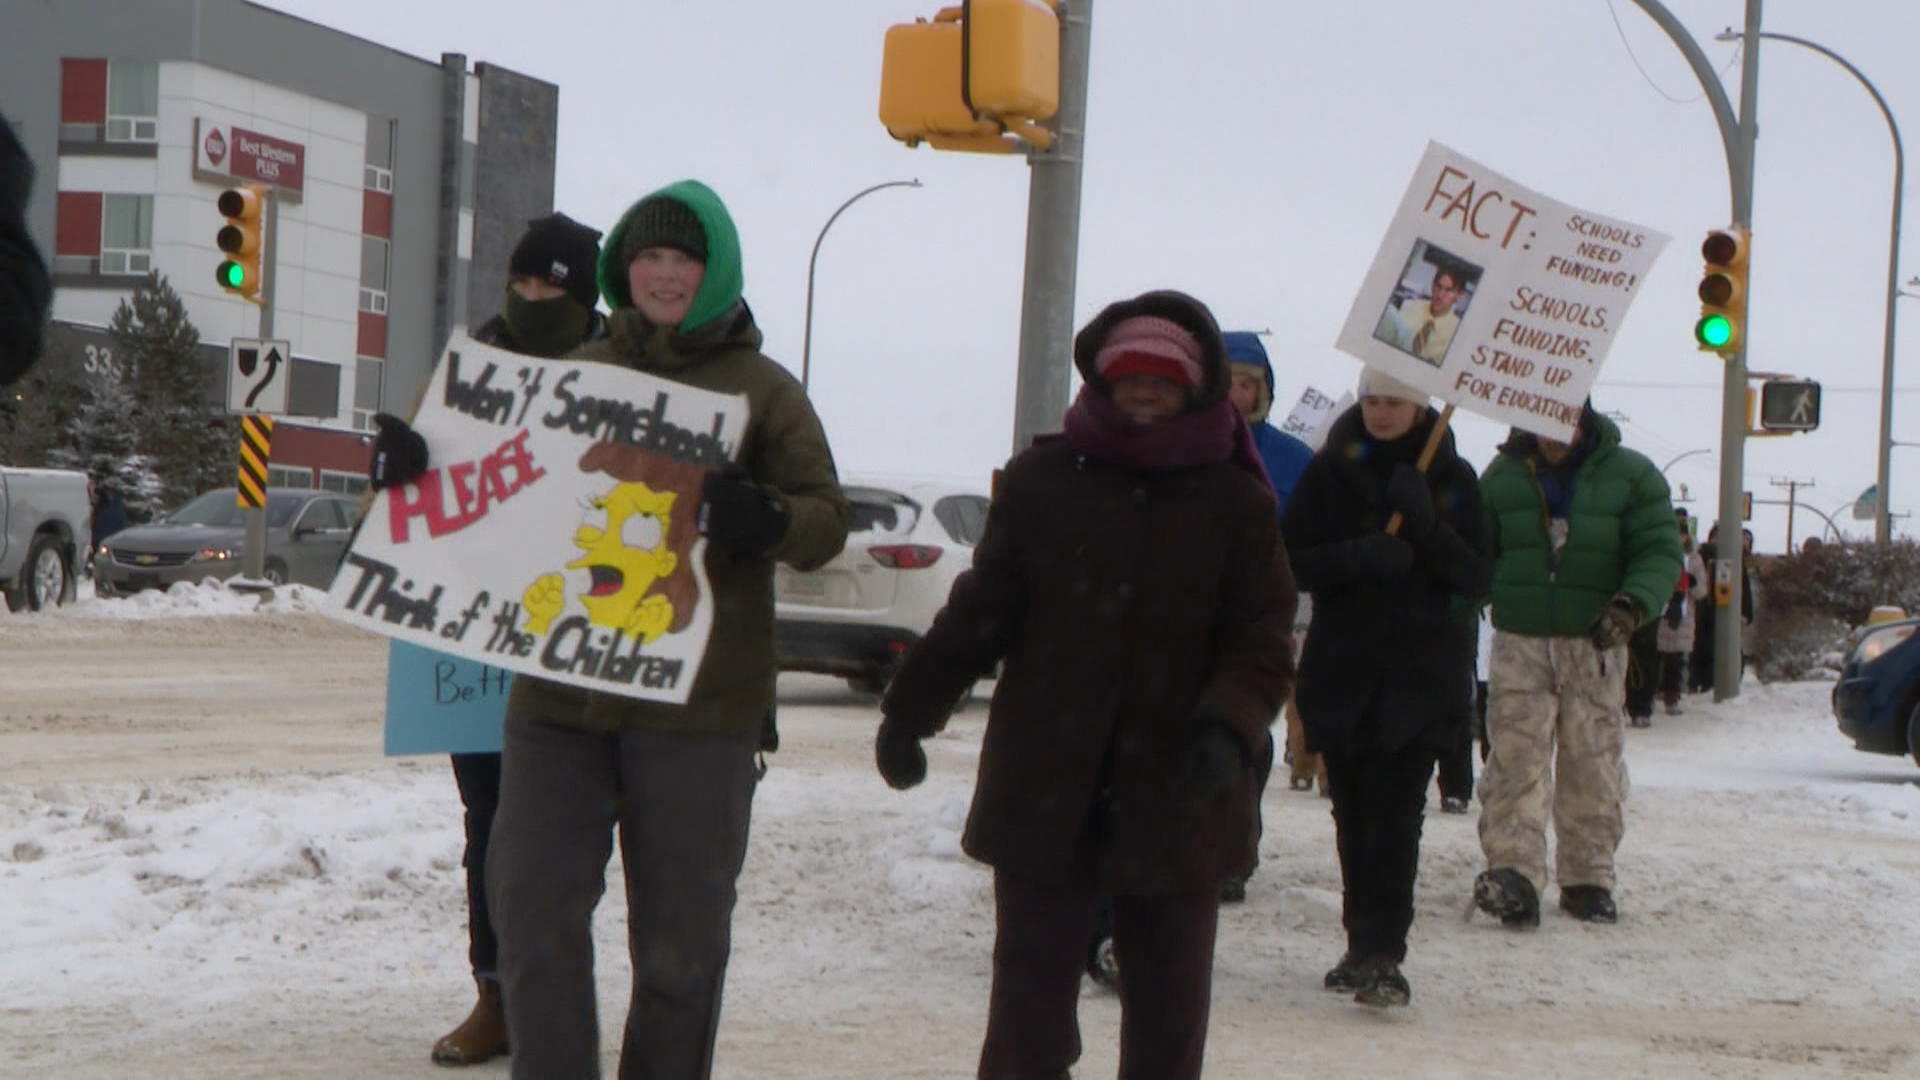 Saskatoon students give insight on state of schools while supporting teachers